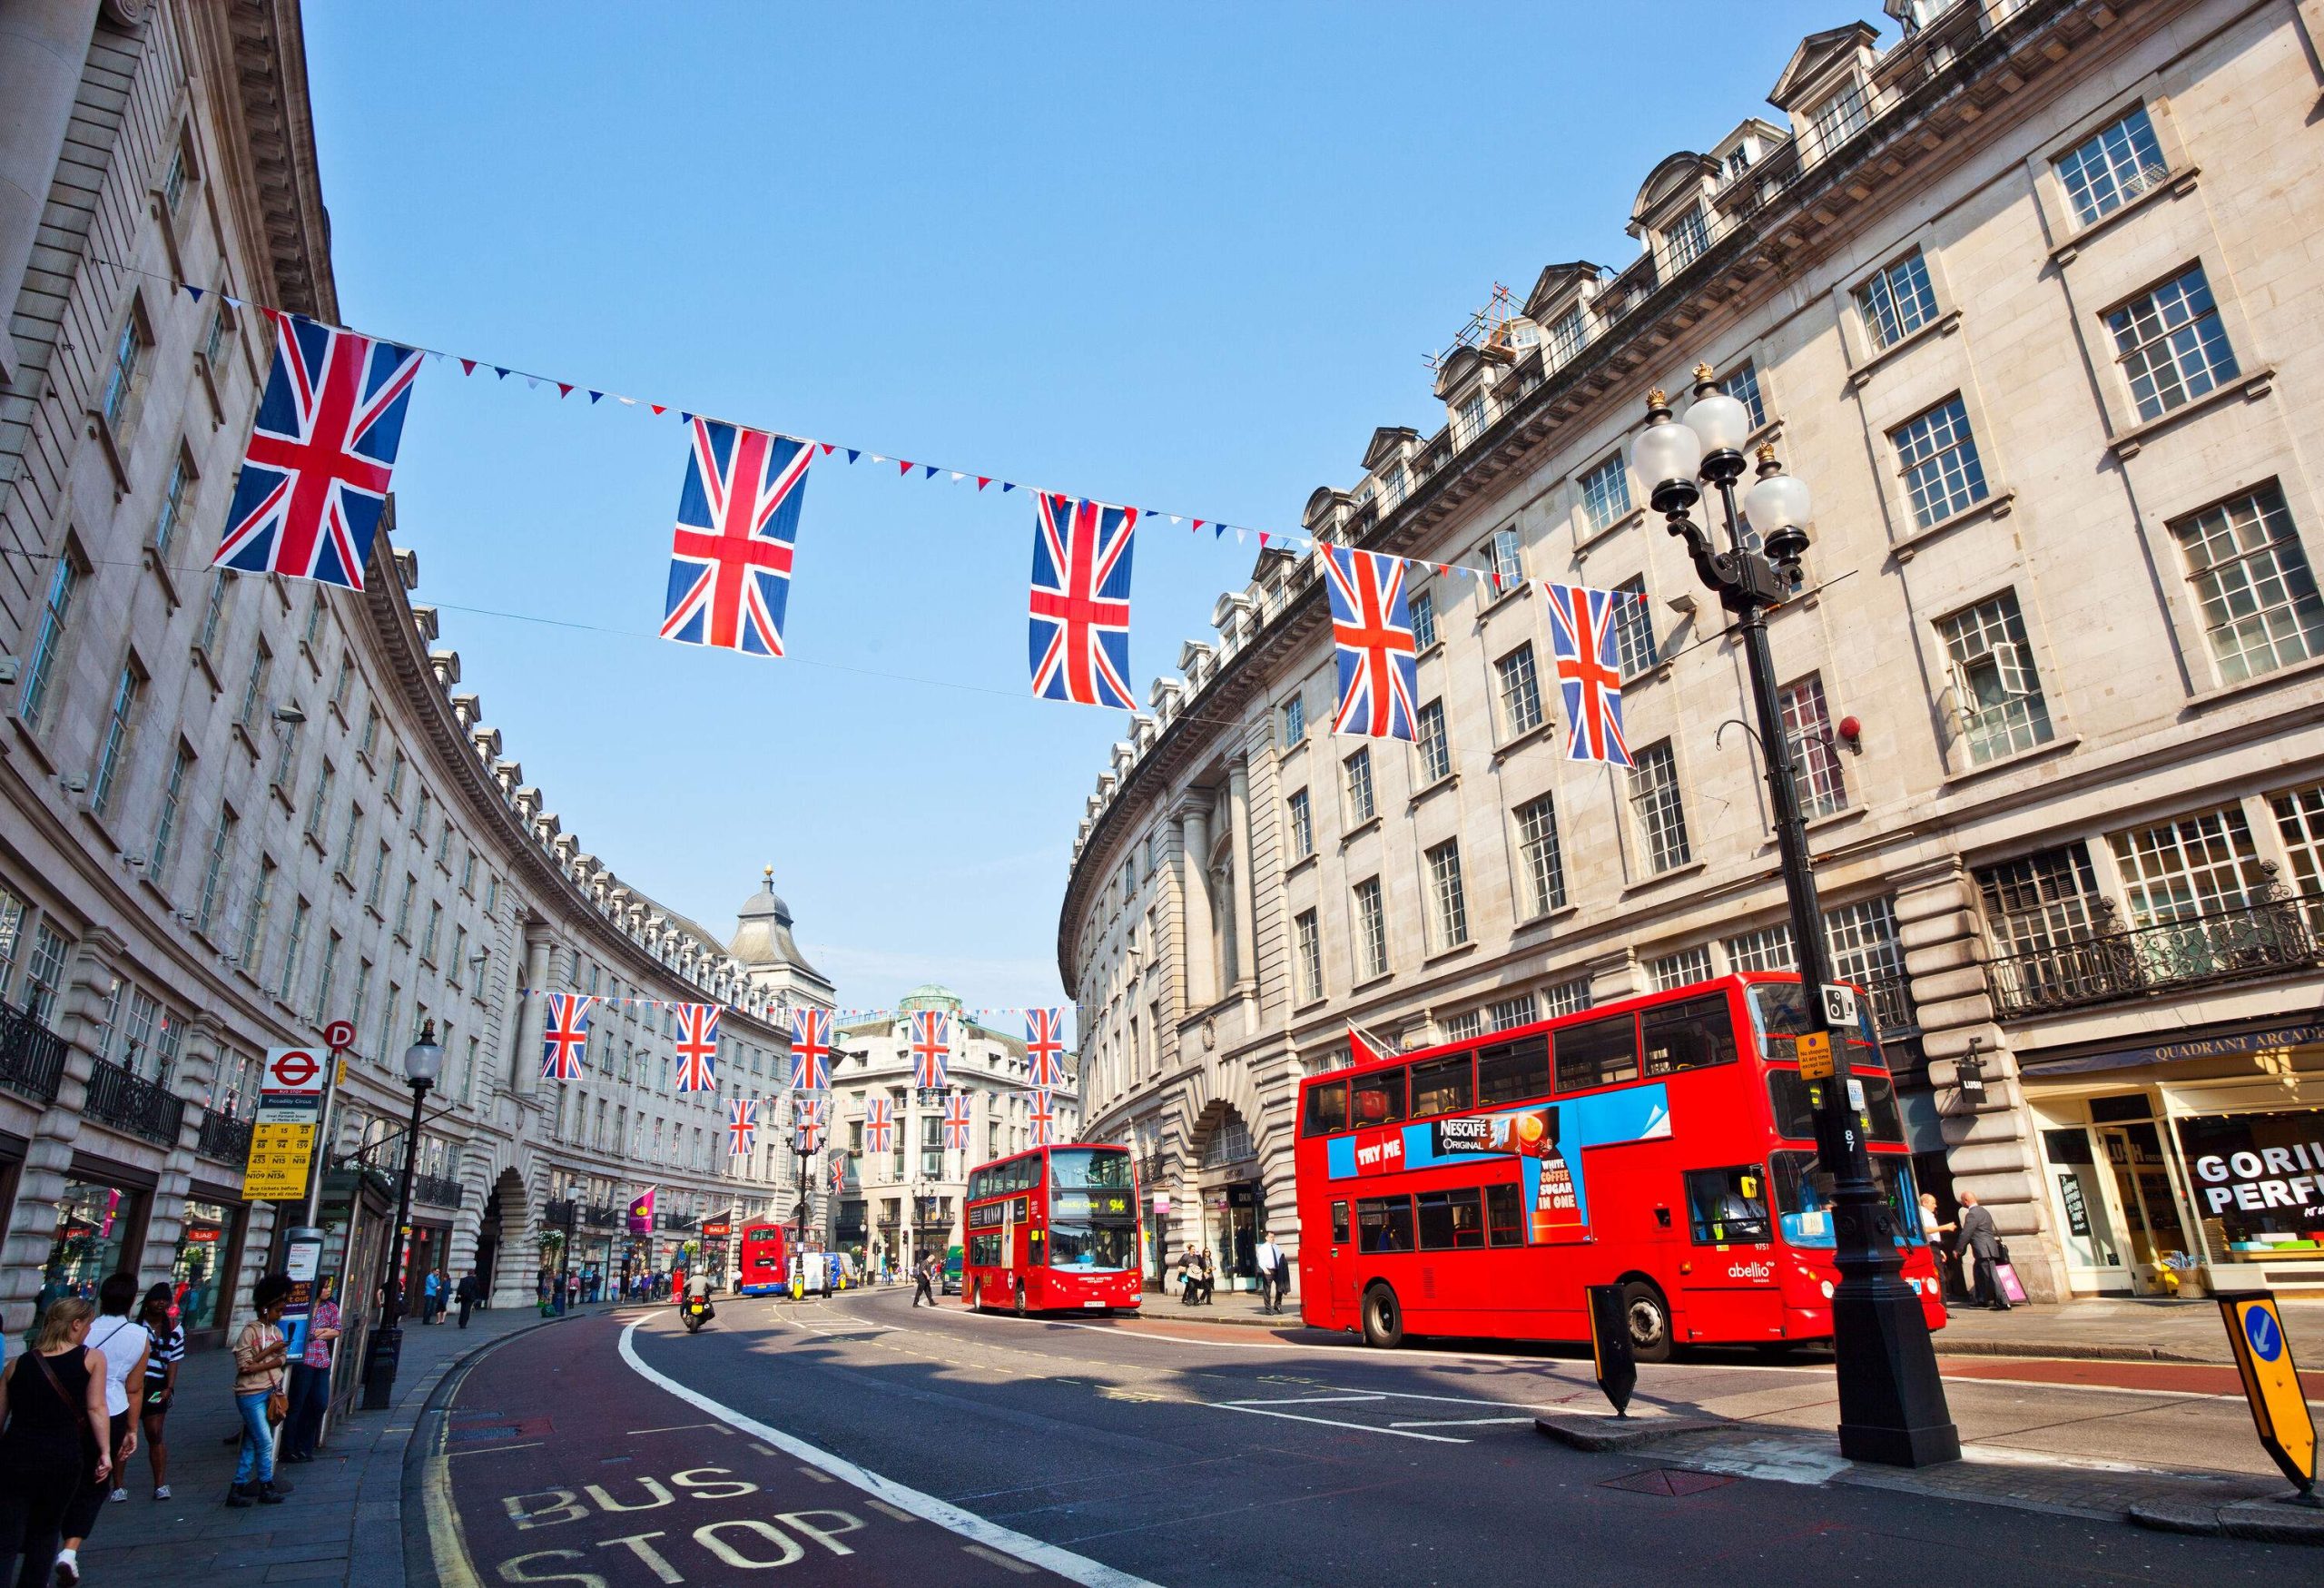 Regents St with red buses and bunting in London street.